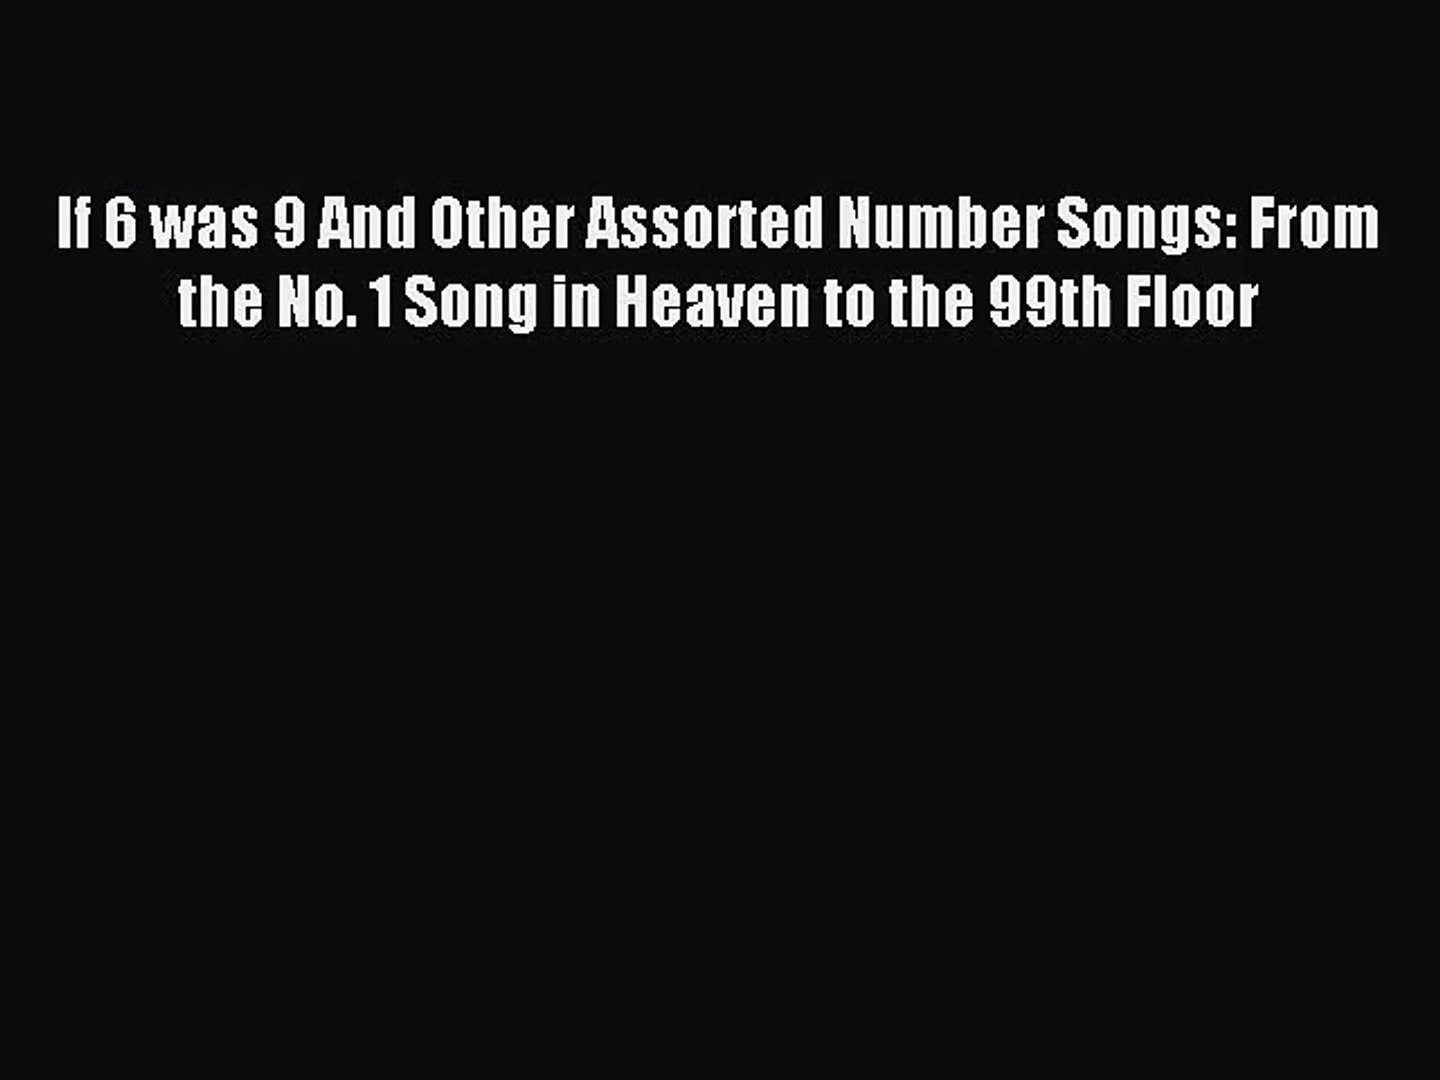 Pdf Download If 6 Was 9 And Other Assorted Number Songs From The